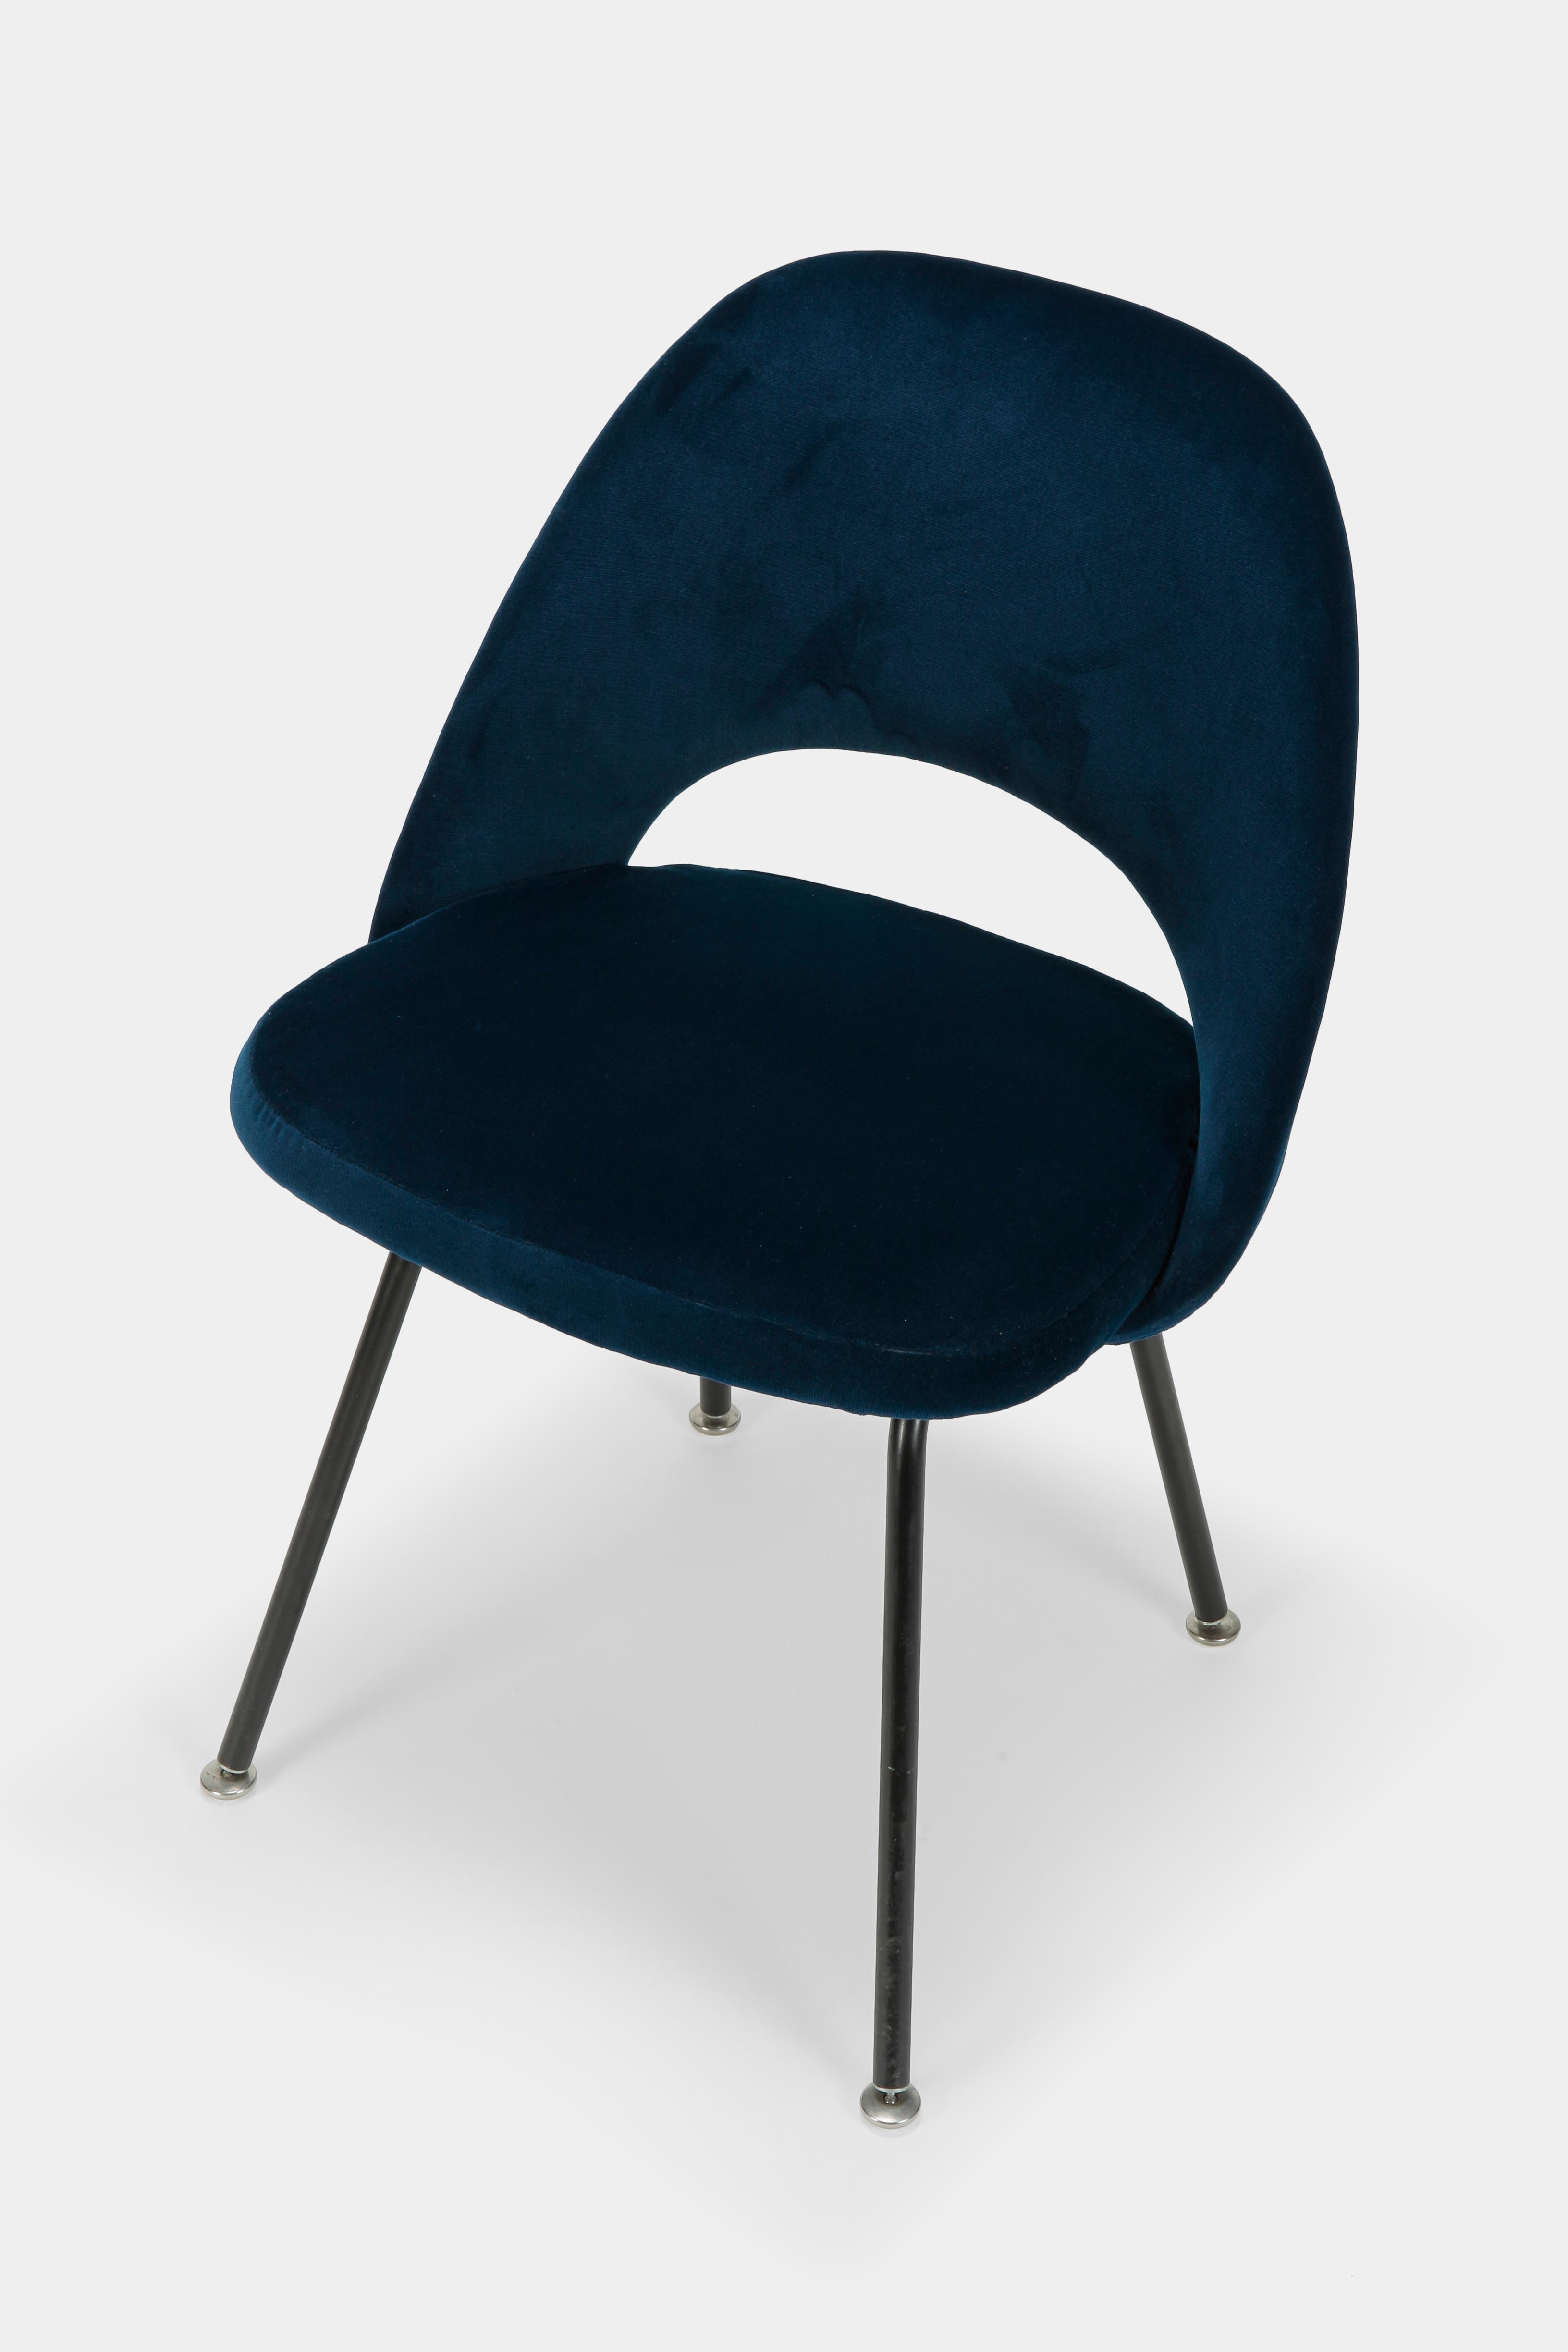 Description
Eero Saarinen chair model 72 manufactured by Knoll International in the 1950s in the USA. This iconic model is reupholstered with a deep blue velvet fabric.
 